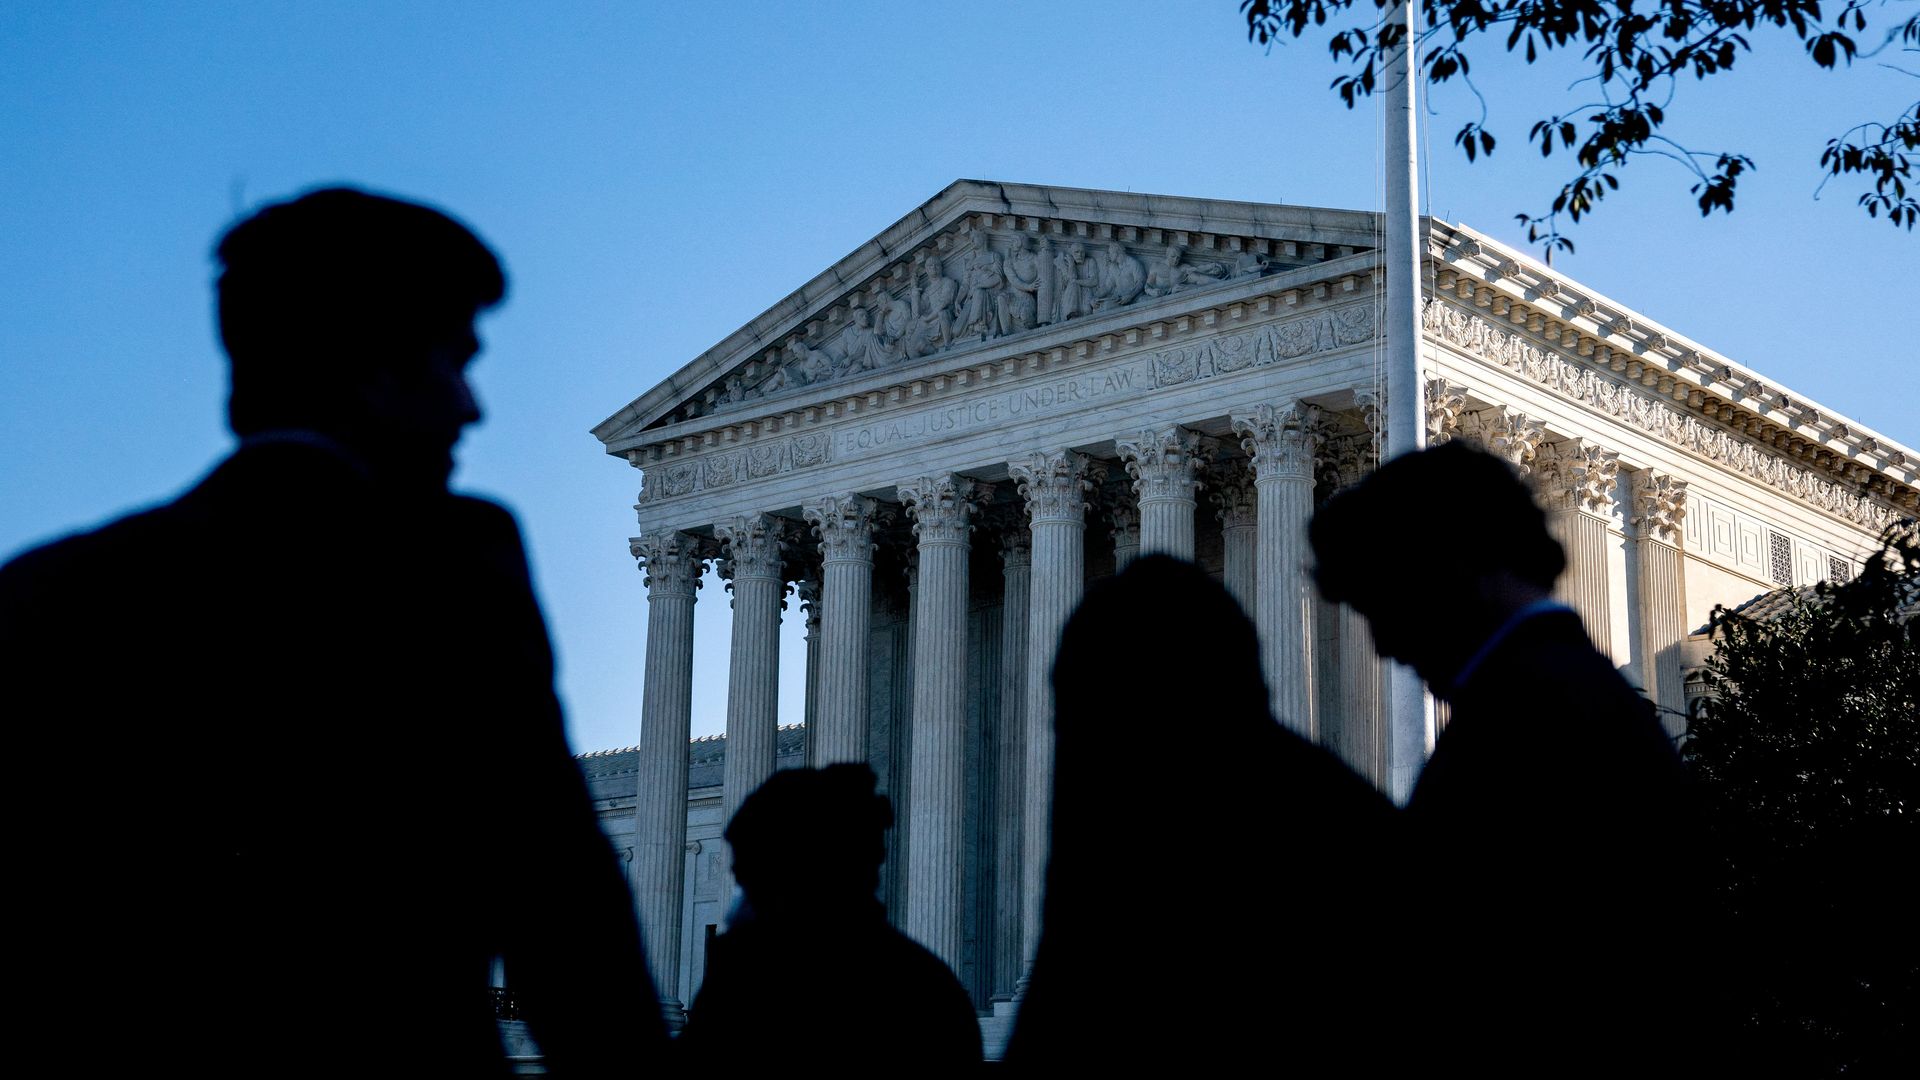 People outside the Supreme Court in Washington, D.C., on Oct. 11.